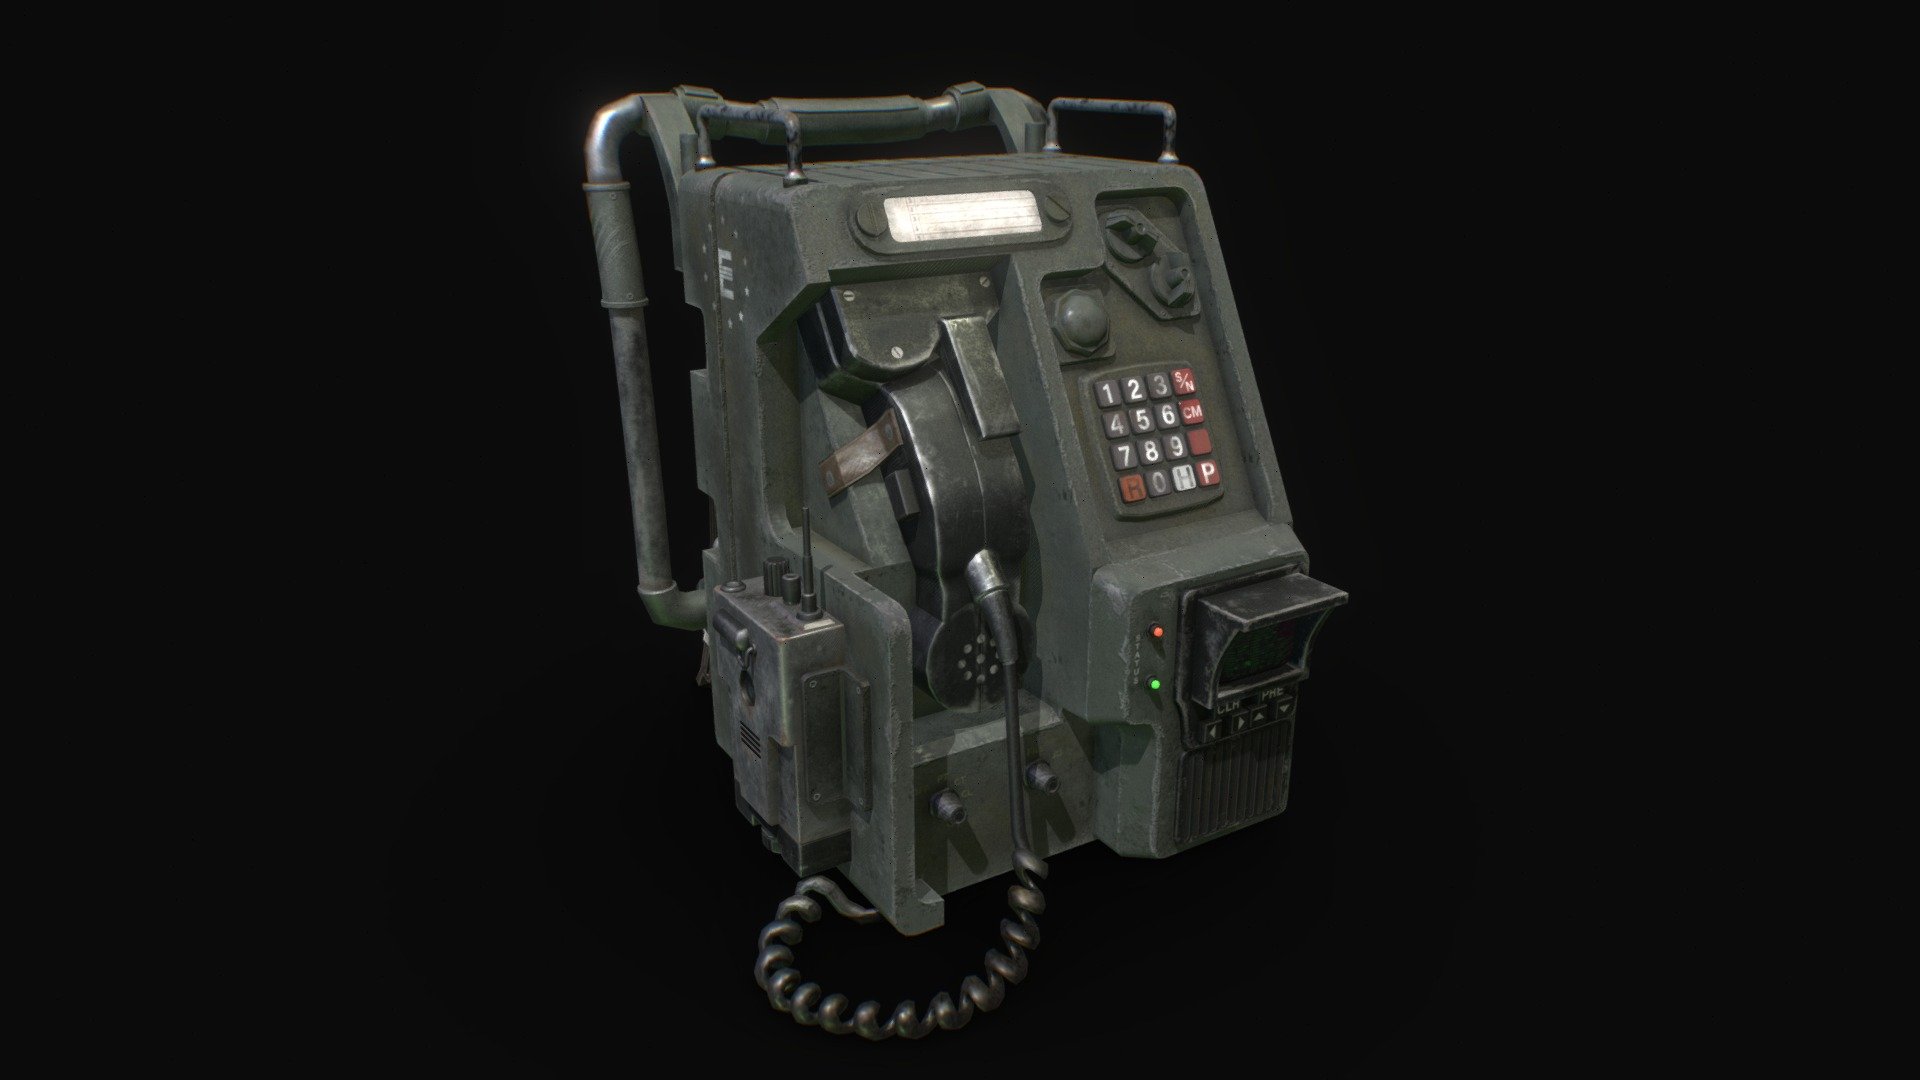 Fallout 76 - Enclave Tactical Pack - Based on the concept art by Nemanja Dojkic
Concept Art: https://www.artstation.com/artwork/aGPbZk

I really tried to push myself in the texturing department for this model it took a while but I learned a lot and I'm very pleased with the result. Link below for the artstation post for some renders and a turntable :)
Renders: https://www.artstation.com/artwork/yJrZg5 - Fallout 76 - Enclave Tactical Pack - Download Free 3D model by Jamie McFarlane (@jamiemcfarlane) 3d model